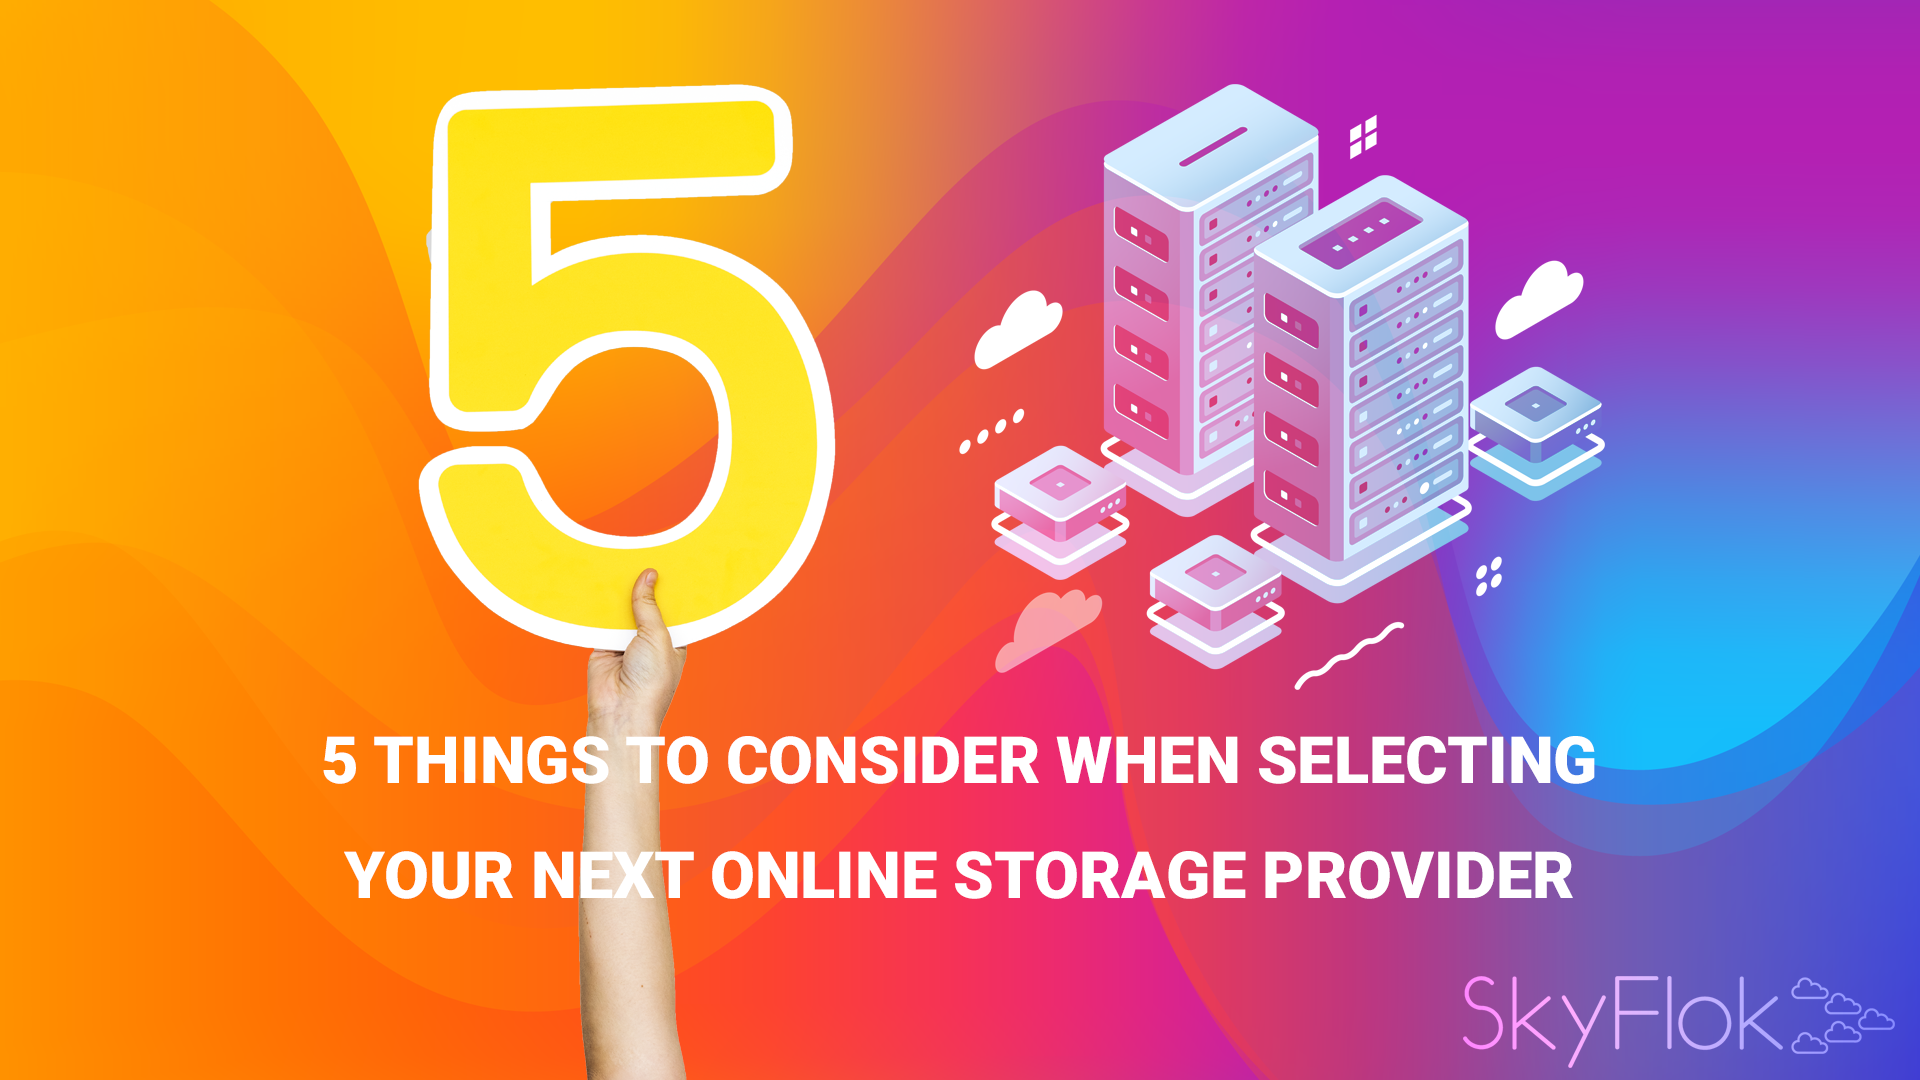 5 things to consider when selecting your next online storage provider